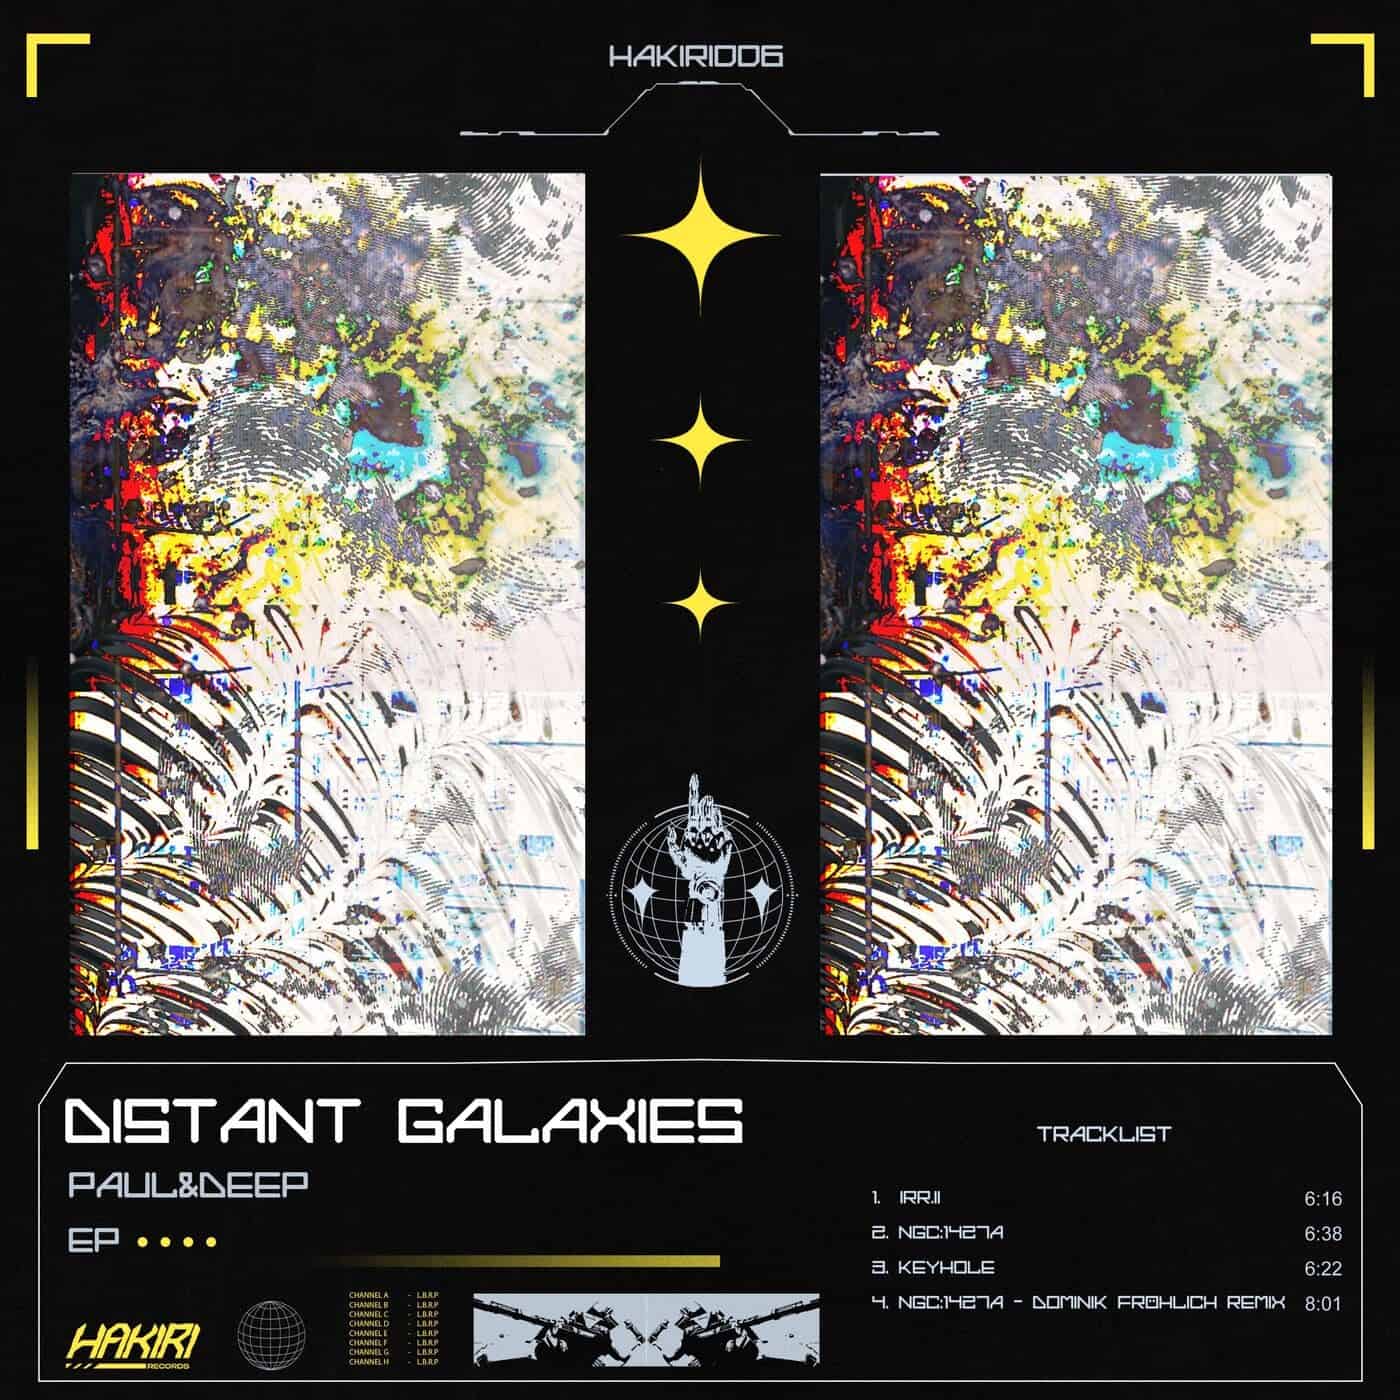 image cover: Paul&Deep - Distant Galaxies / 10225789